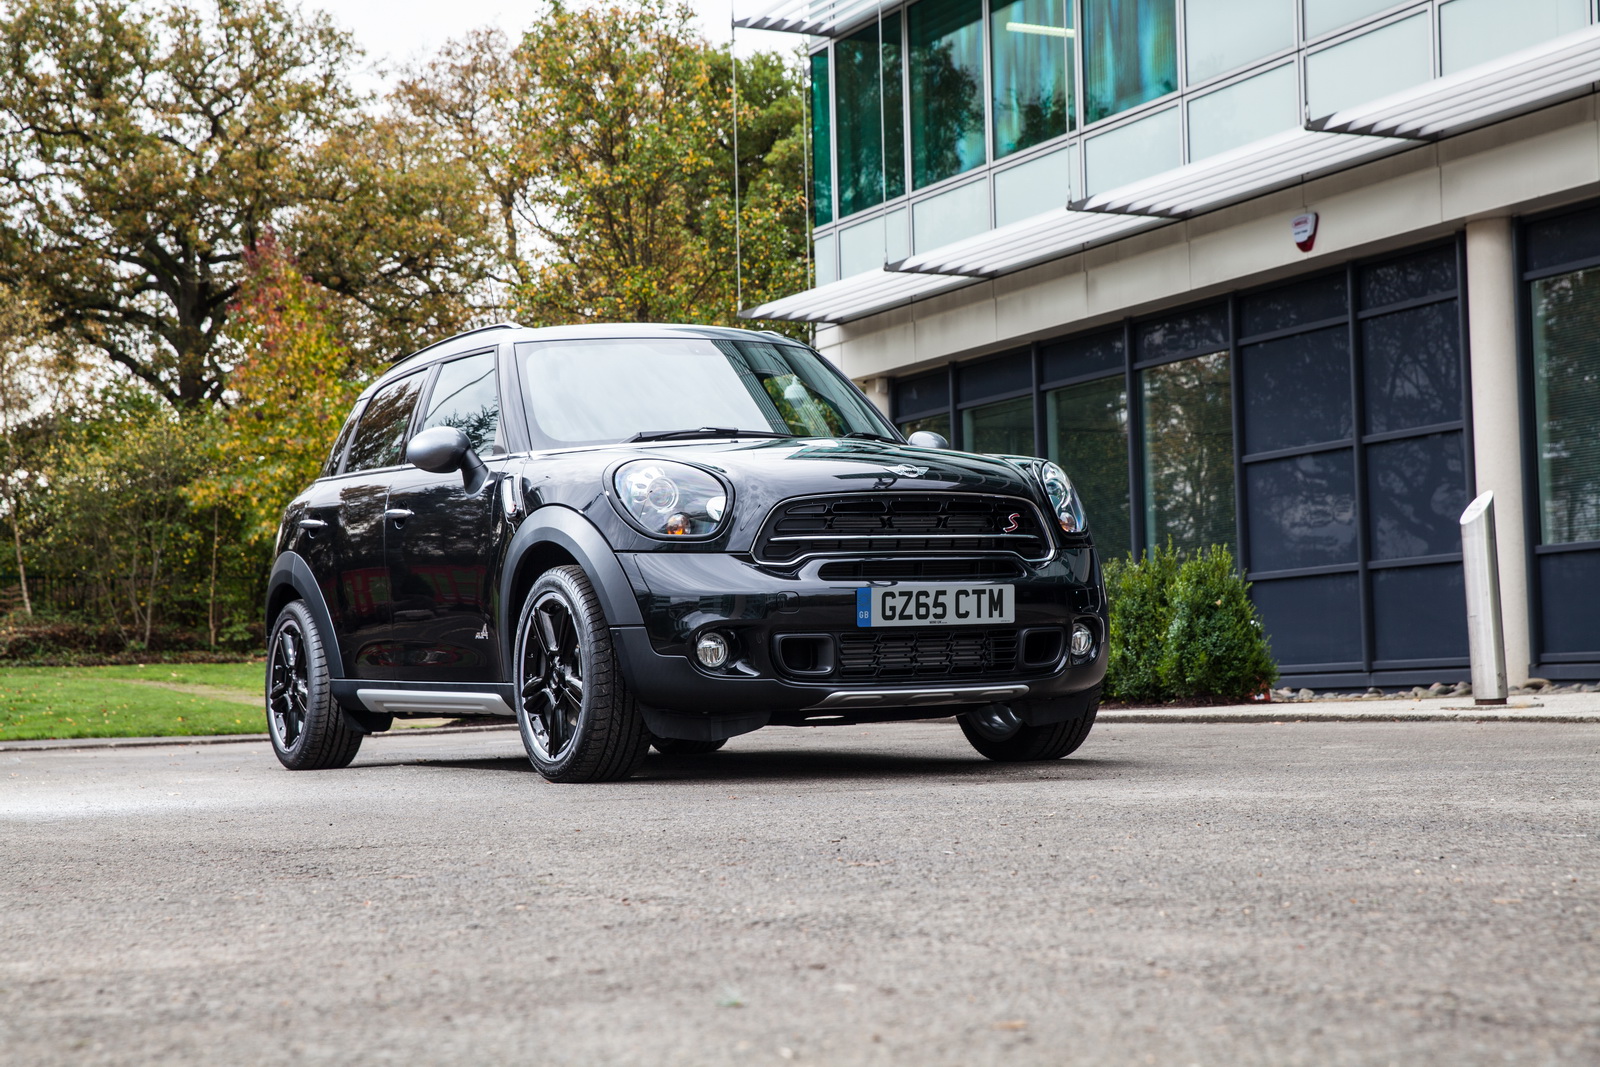 MINI Countryman Special Edition Announced in the UK